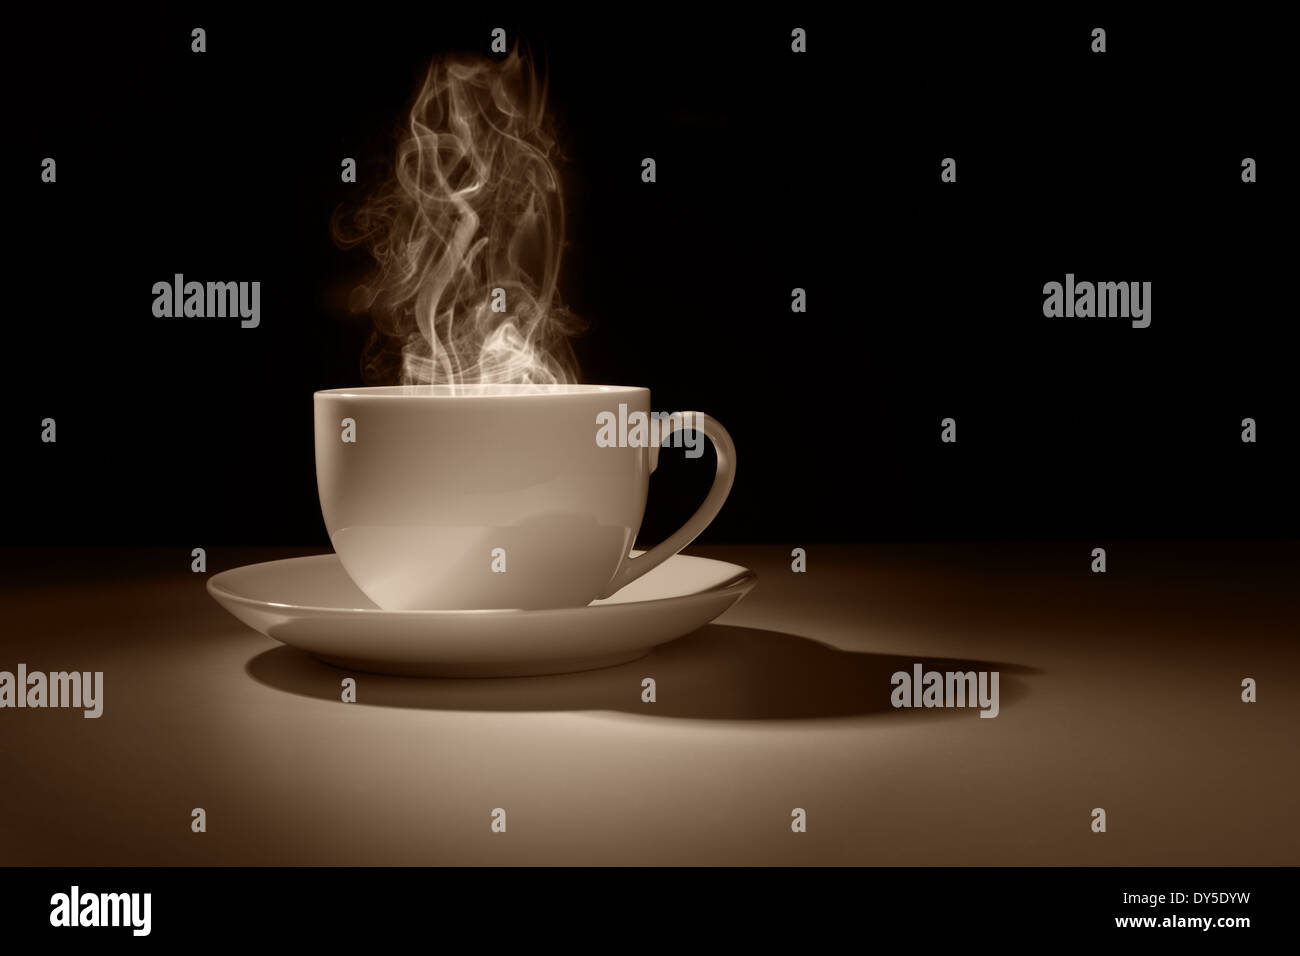 Hot cup of coffee or tea Stock Photo